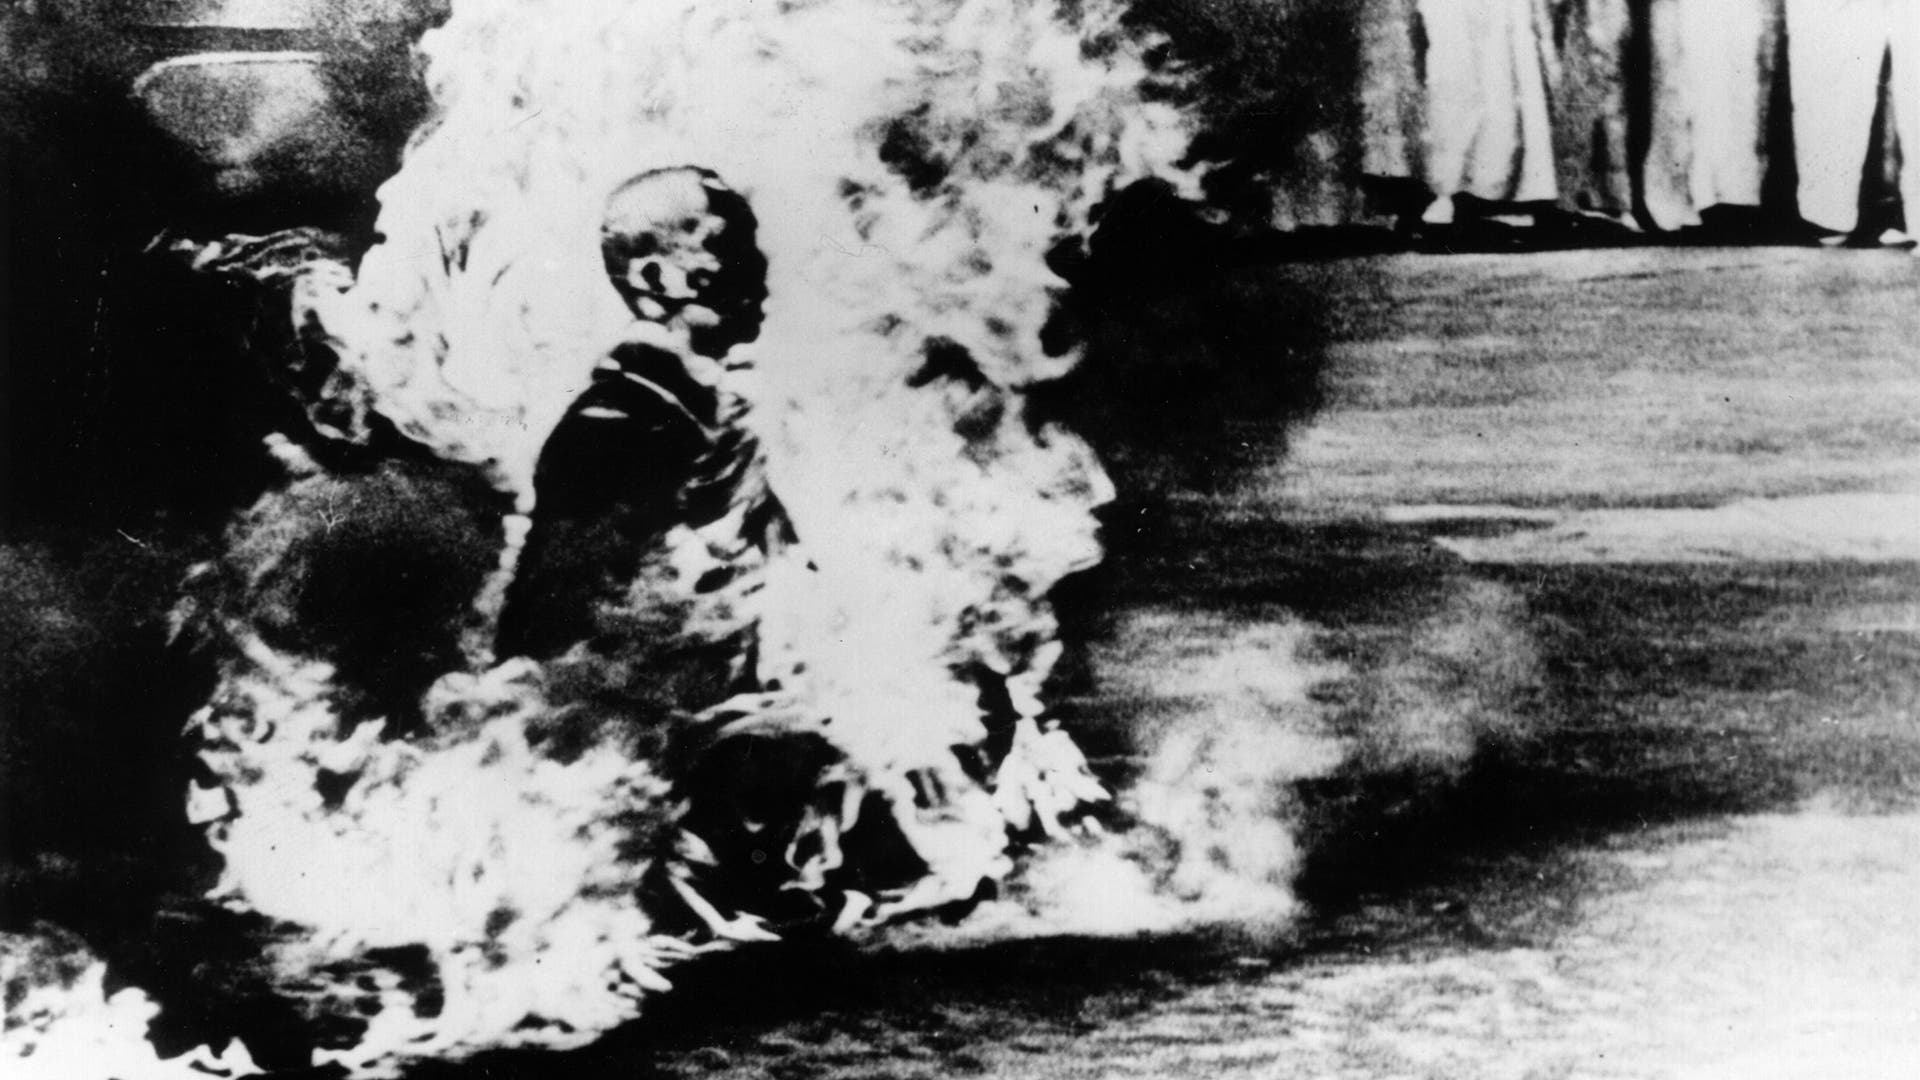 A buddhist monk makes the ultimate protest in Saigon by self-immolation on June 11, 1963.